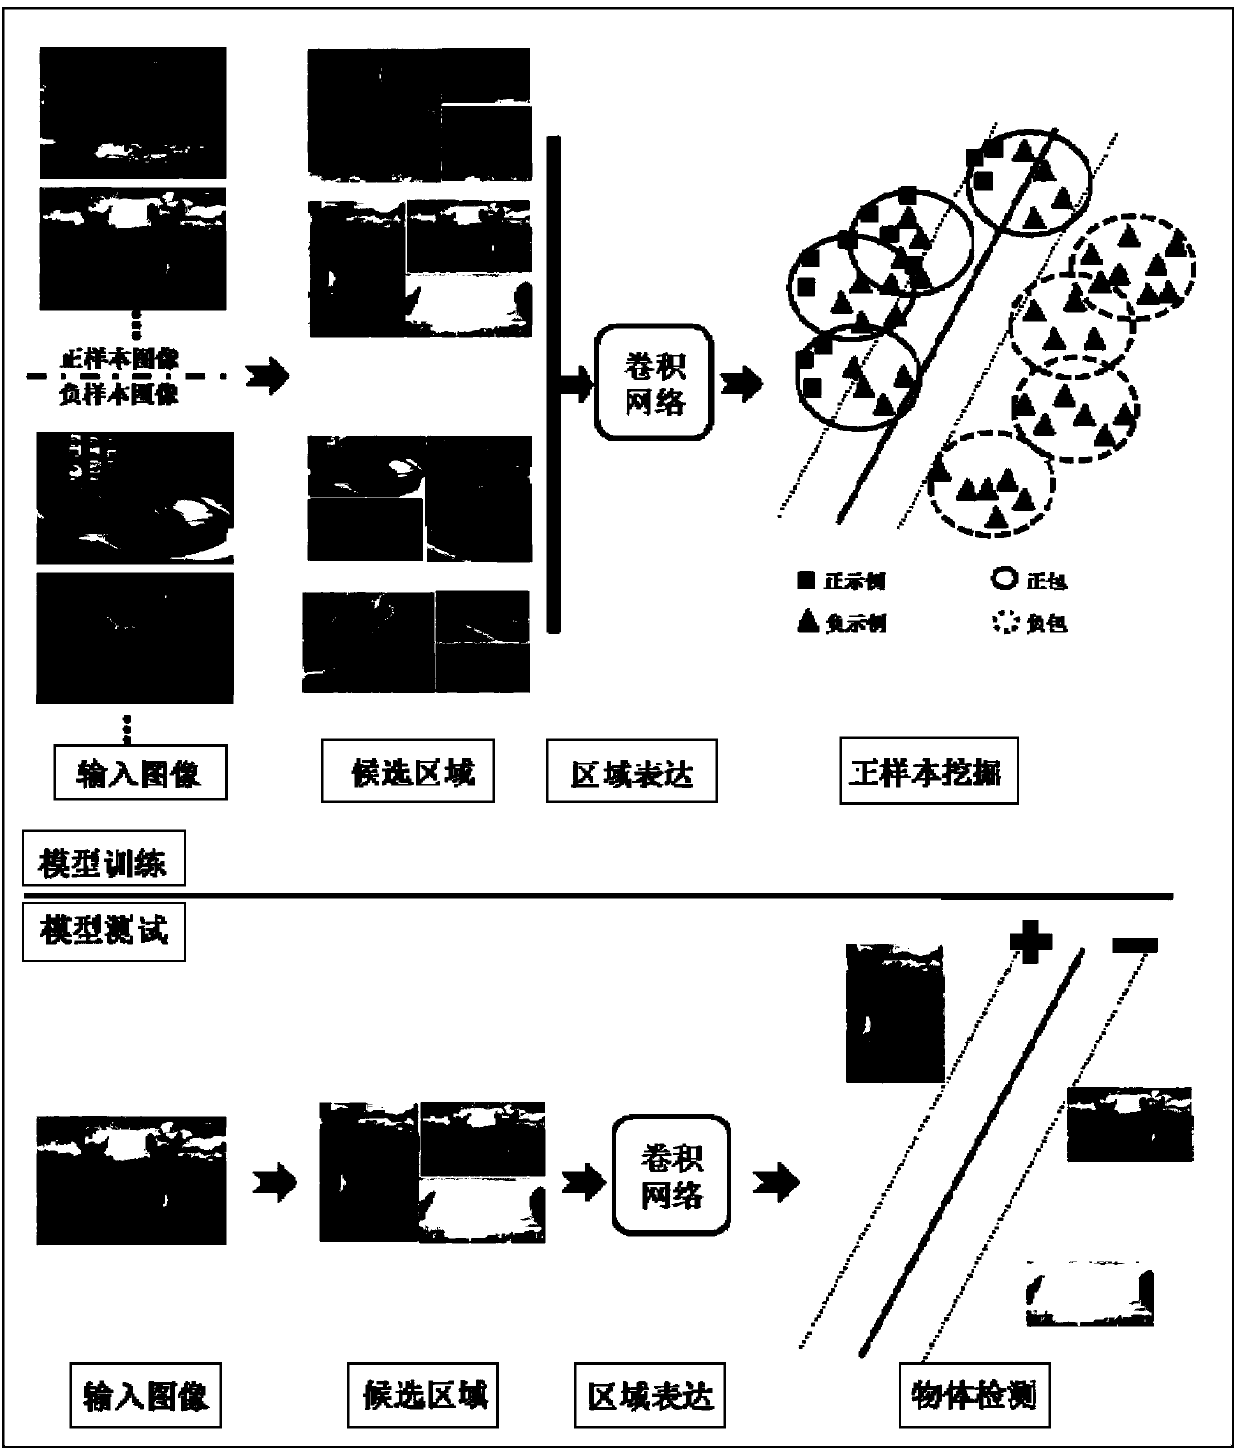 A visual target detection and labeling method